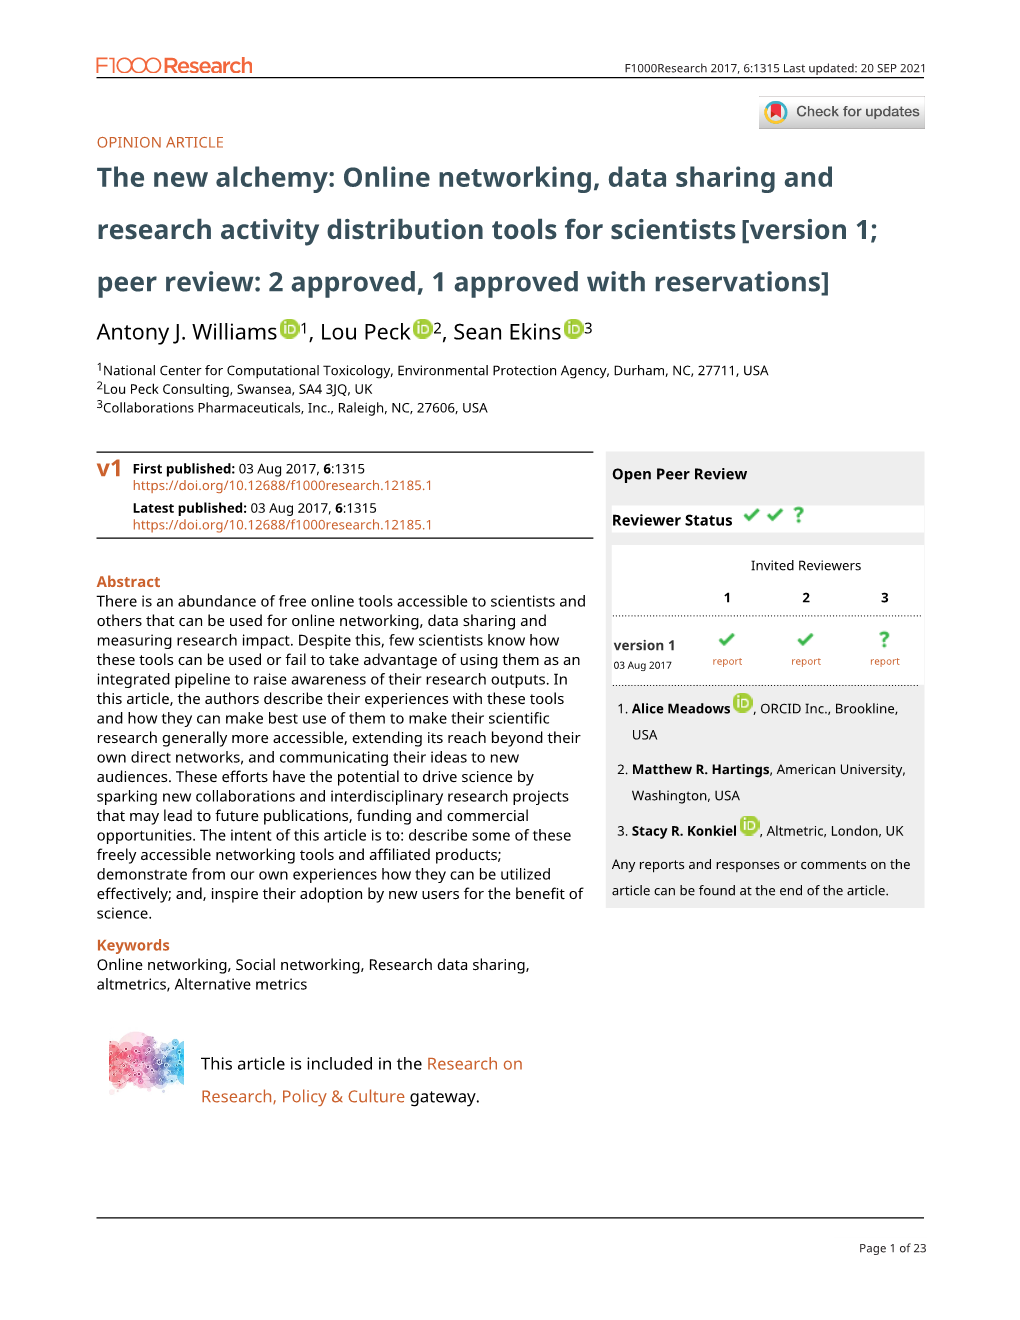 The New Alchemy: Online Networking, Data Sharing And